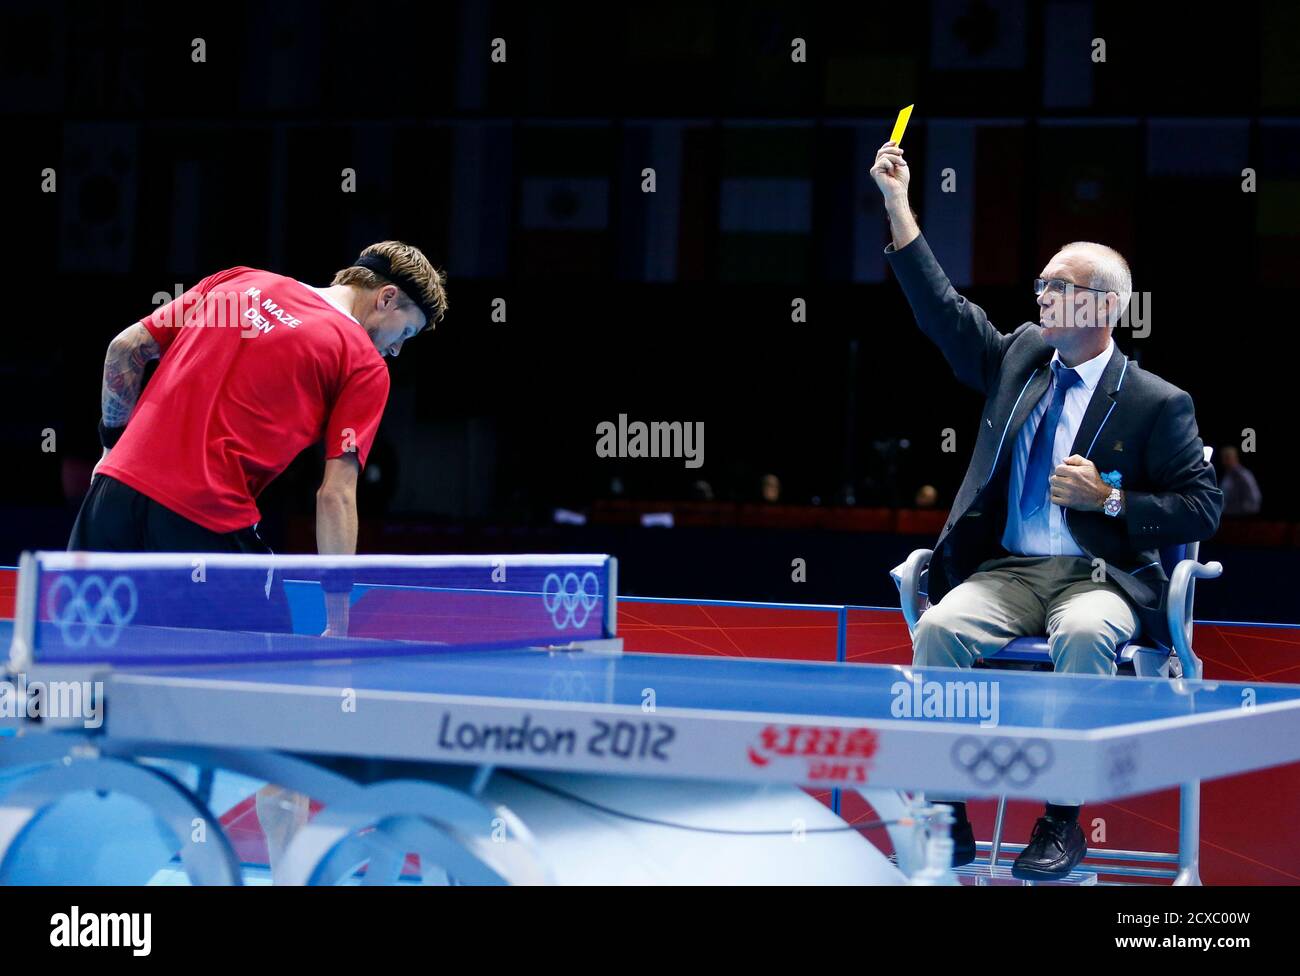 Denmark's Michael Maze gets a yellow card from the umpire for throwing the  ball in his men's singles quarterfinals table tennis match at the ExCel  venue against Germany's Dimitrij Ovtcharov during the